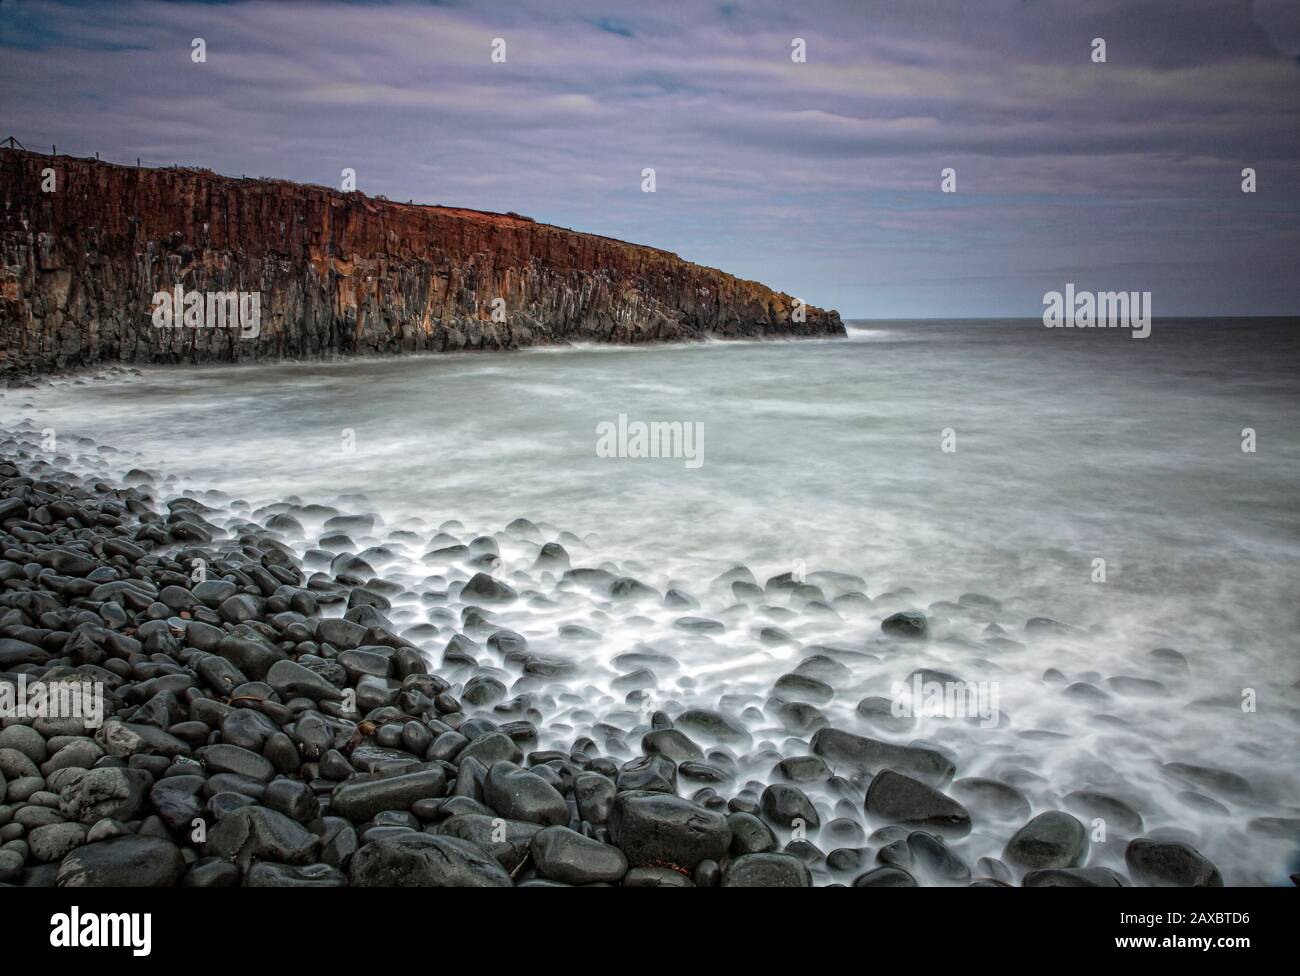 Rocks on remote ocean beach Cullernose Point Craster Northumberland UK Stock Photo